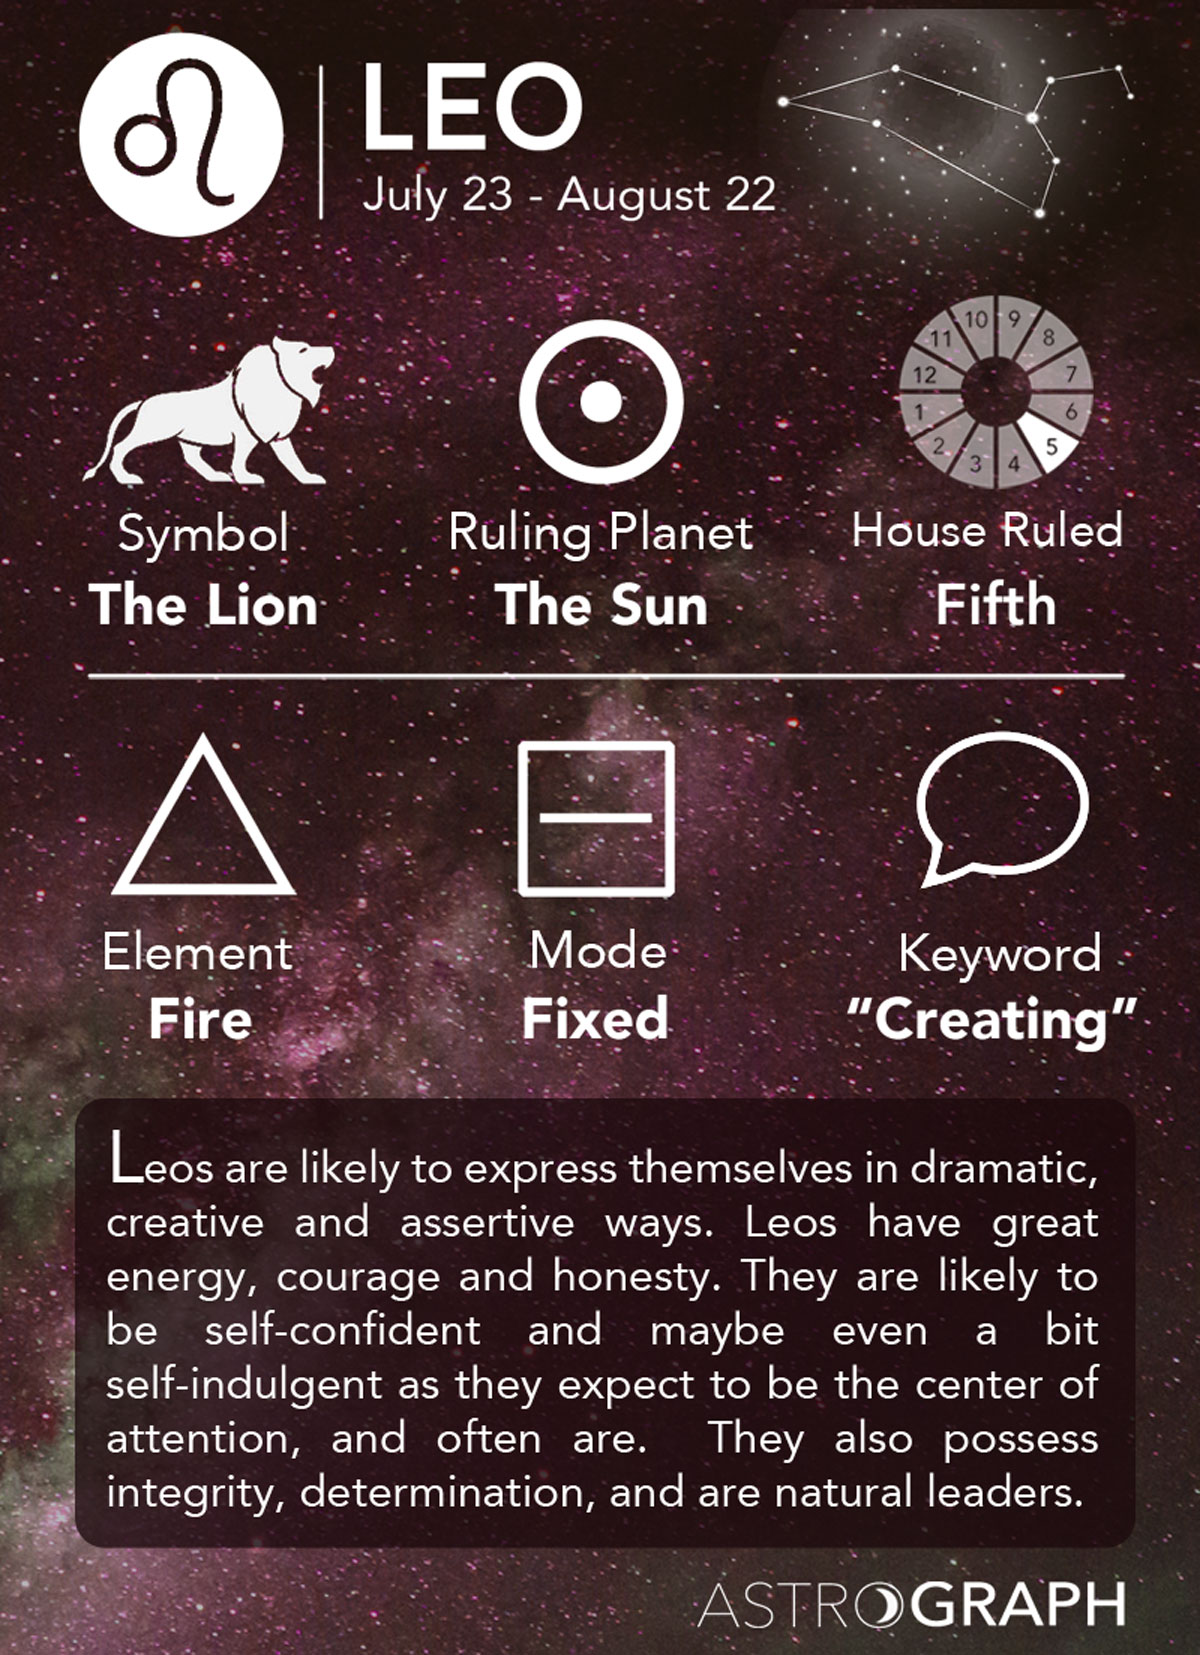 What's a Leo's element?